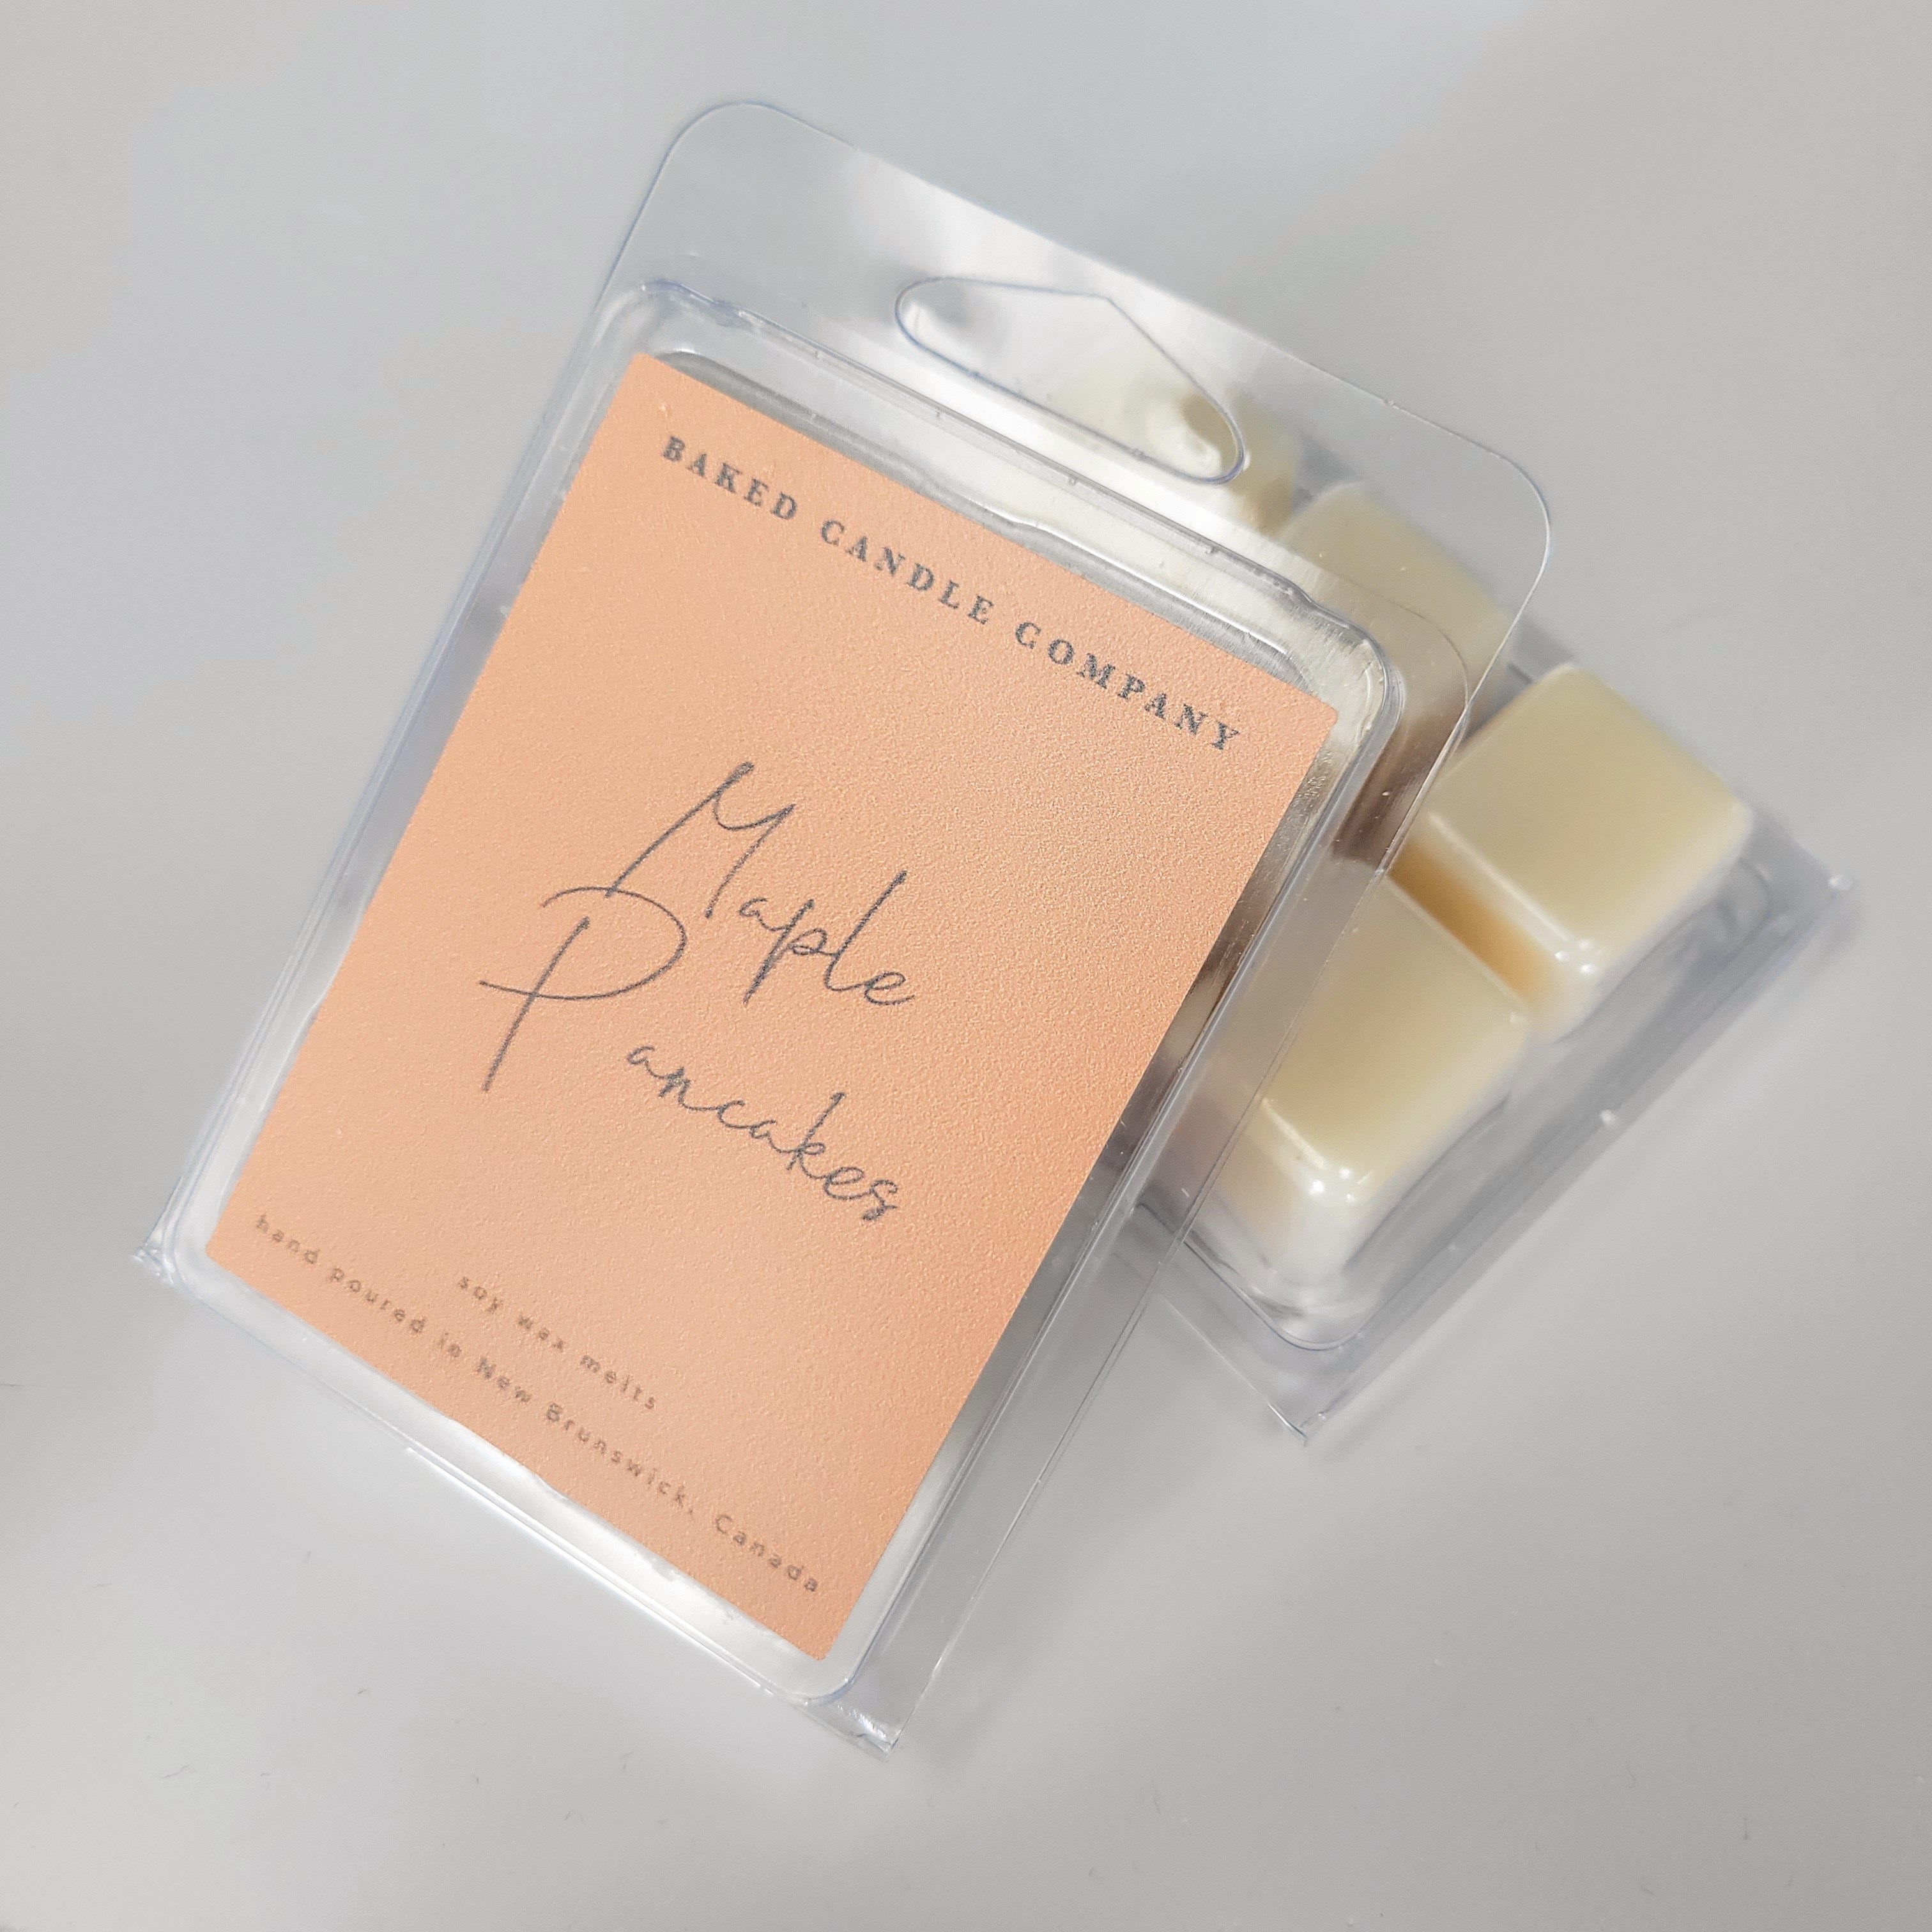 Baked Candle Co. Wax Melts